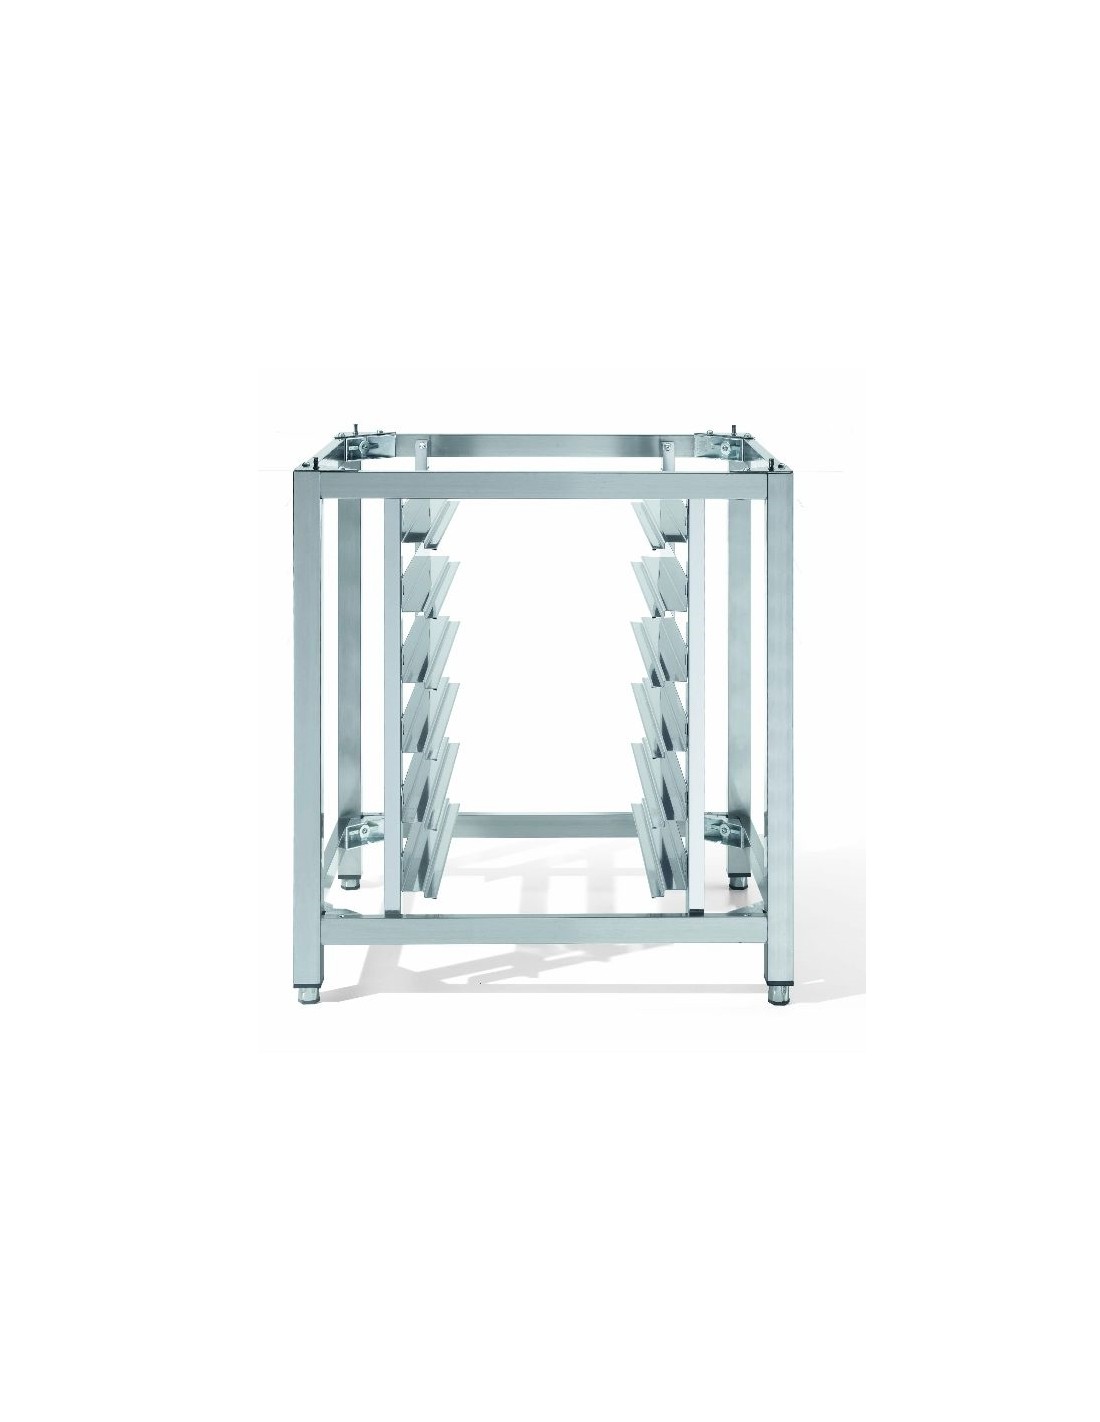 Oven support - For STR6-STR10 oven - Stainless steel structure - Supplied with assembly kit - Dimensions 79 x 73.5 x